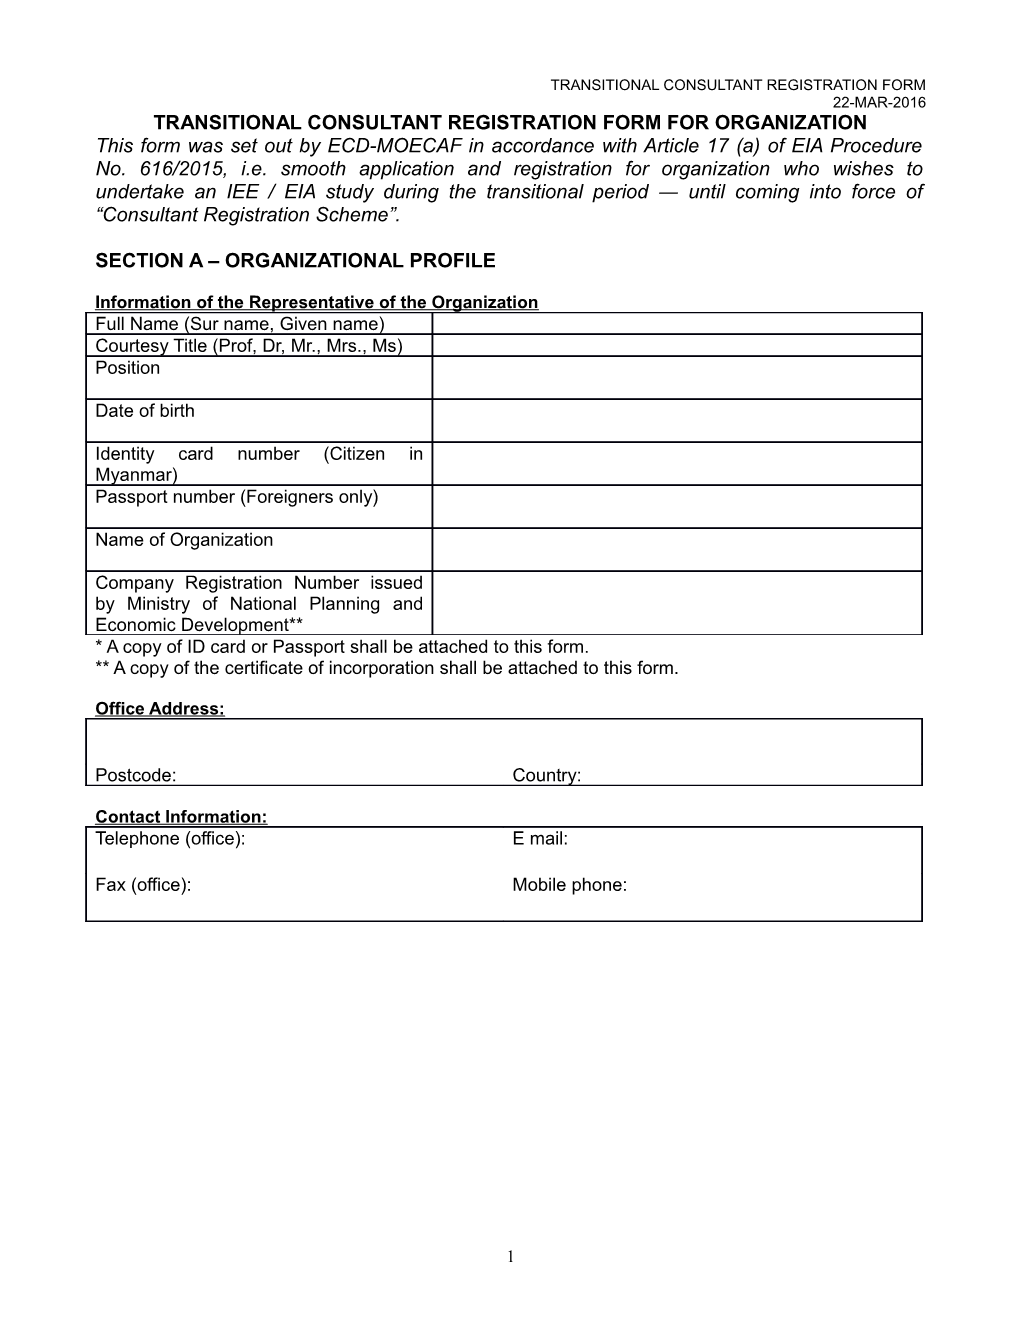 Transitional Consultantregistration Form for Organization